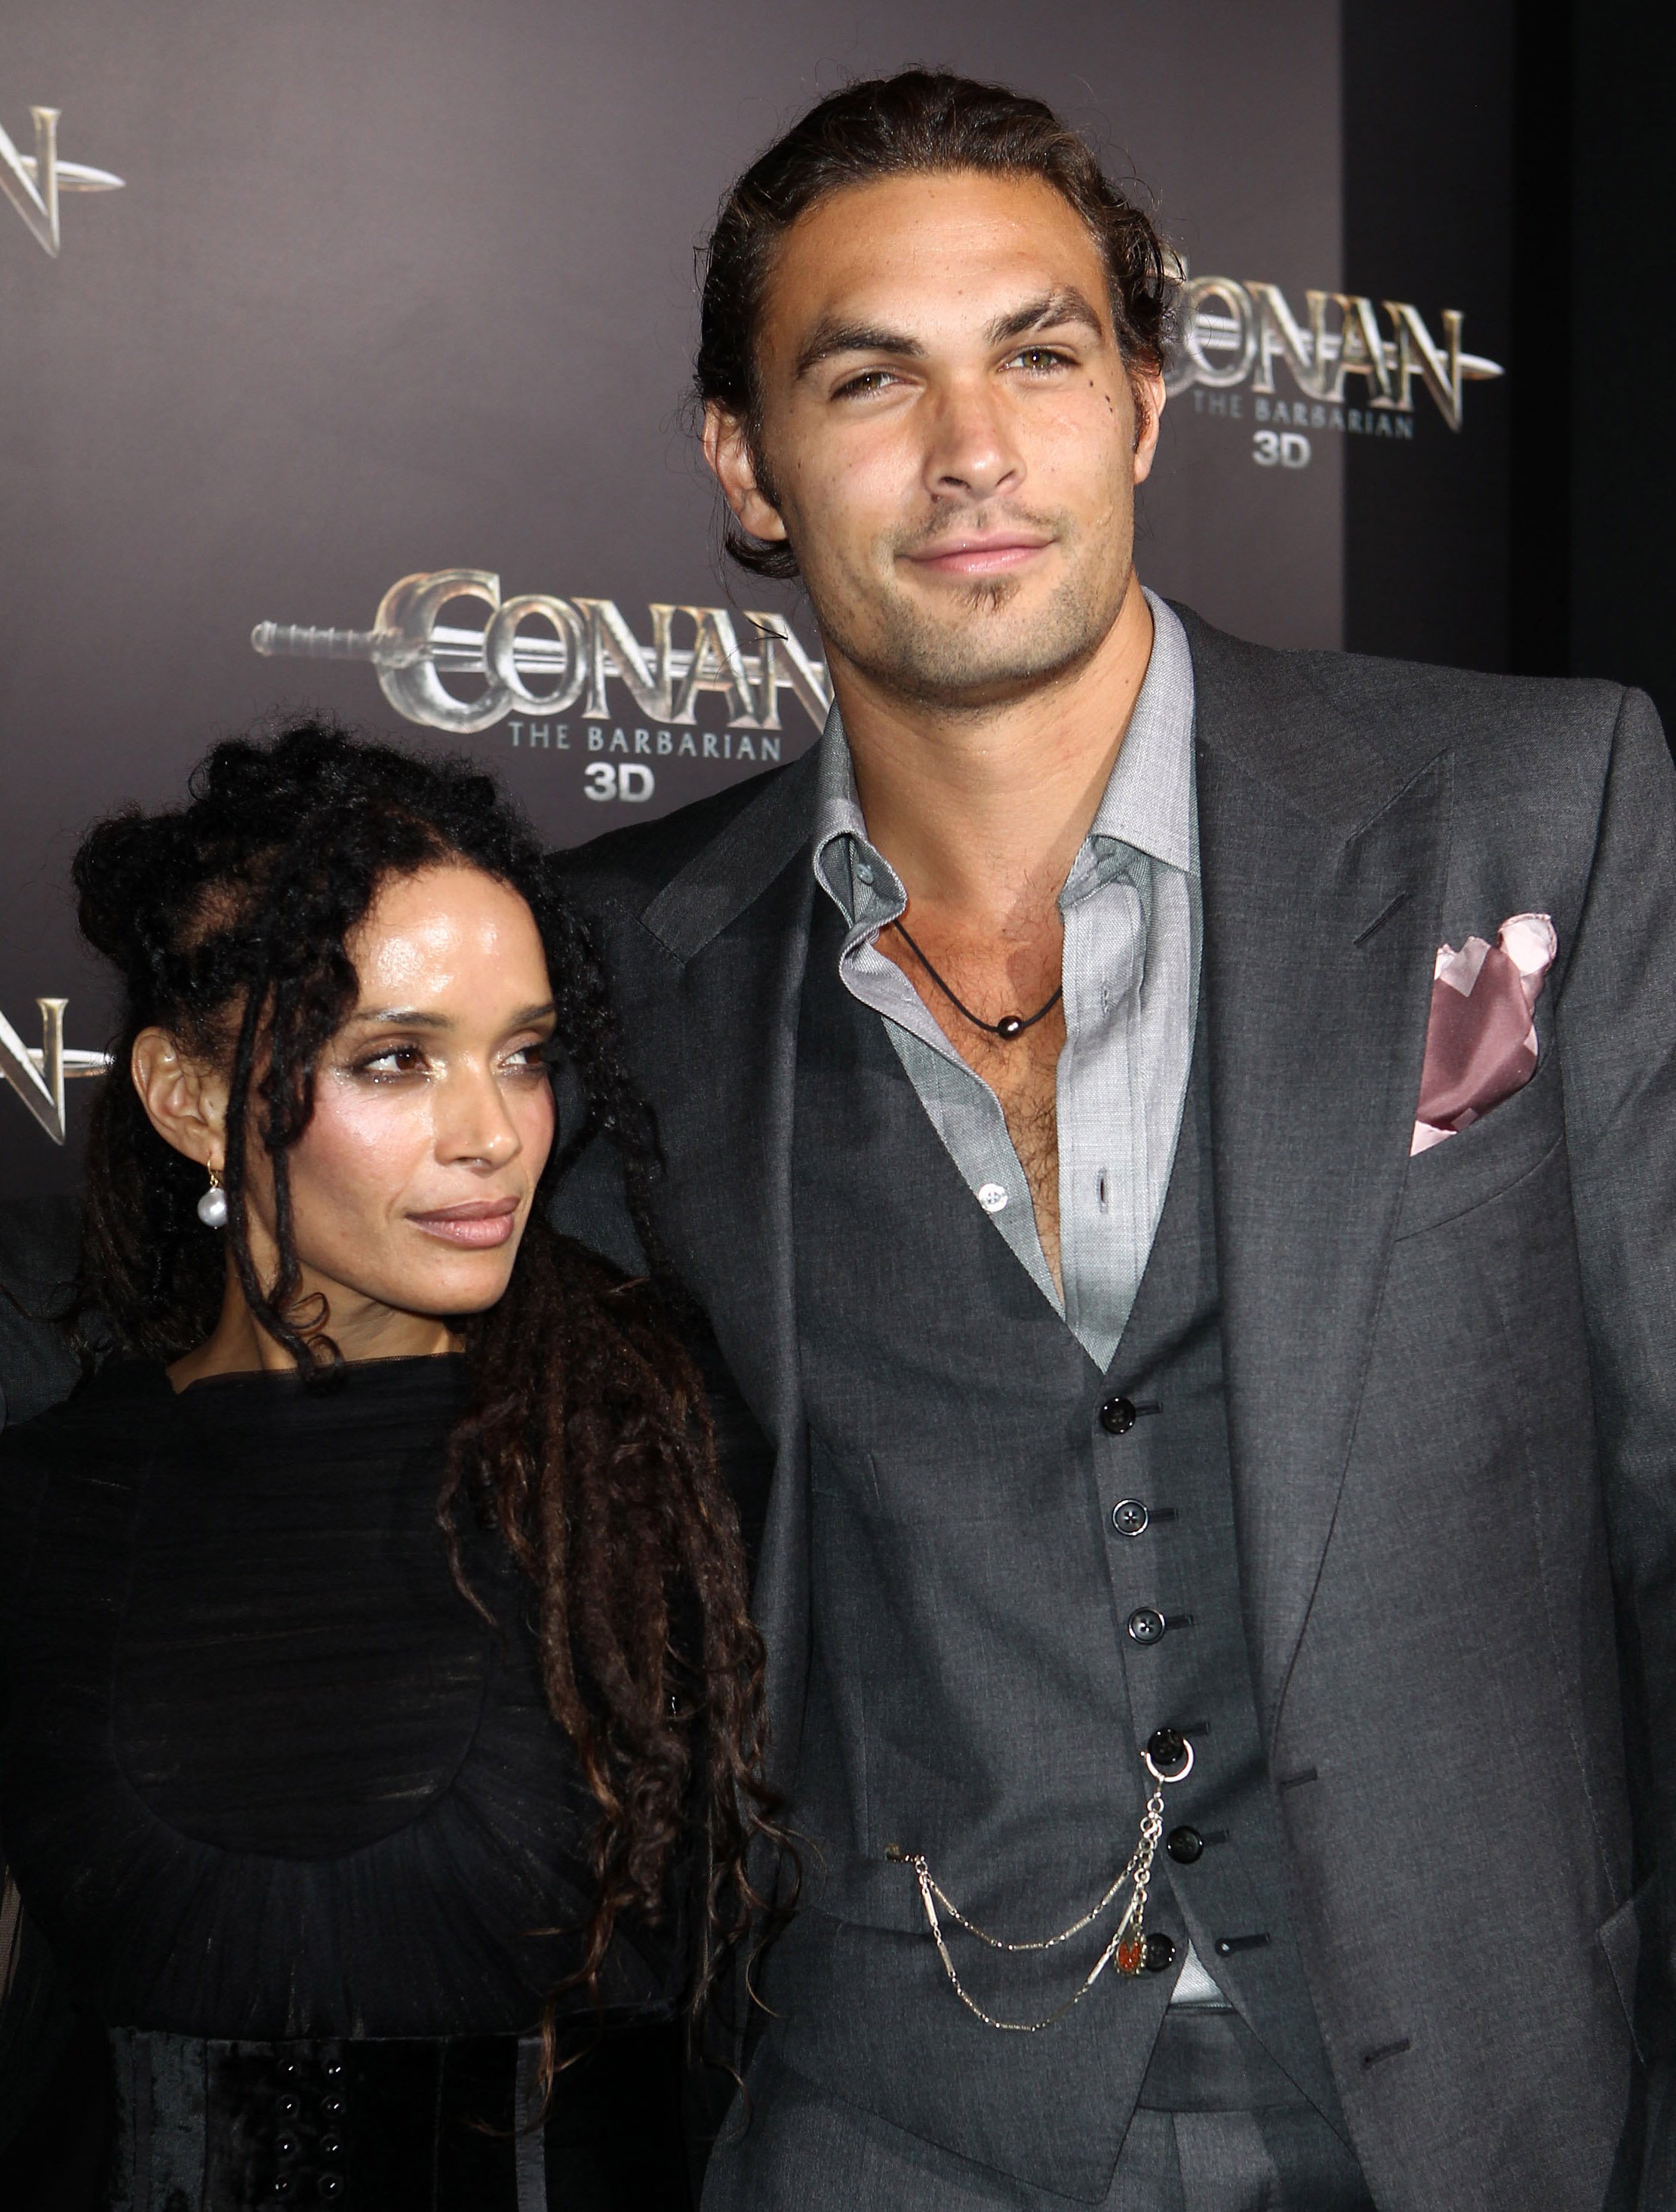 Lisa Bonet and Jason Momoa at the world premiere of "Conan The Barbarian" on August 11, 2011, in Los Angeles, California. | Source: Getty Images